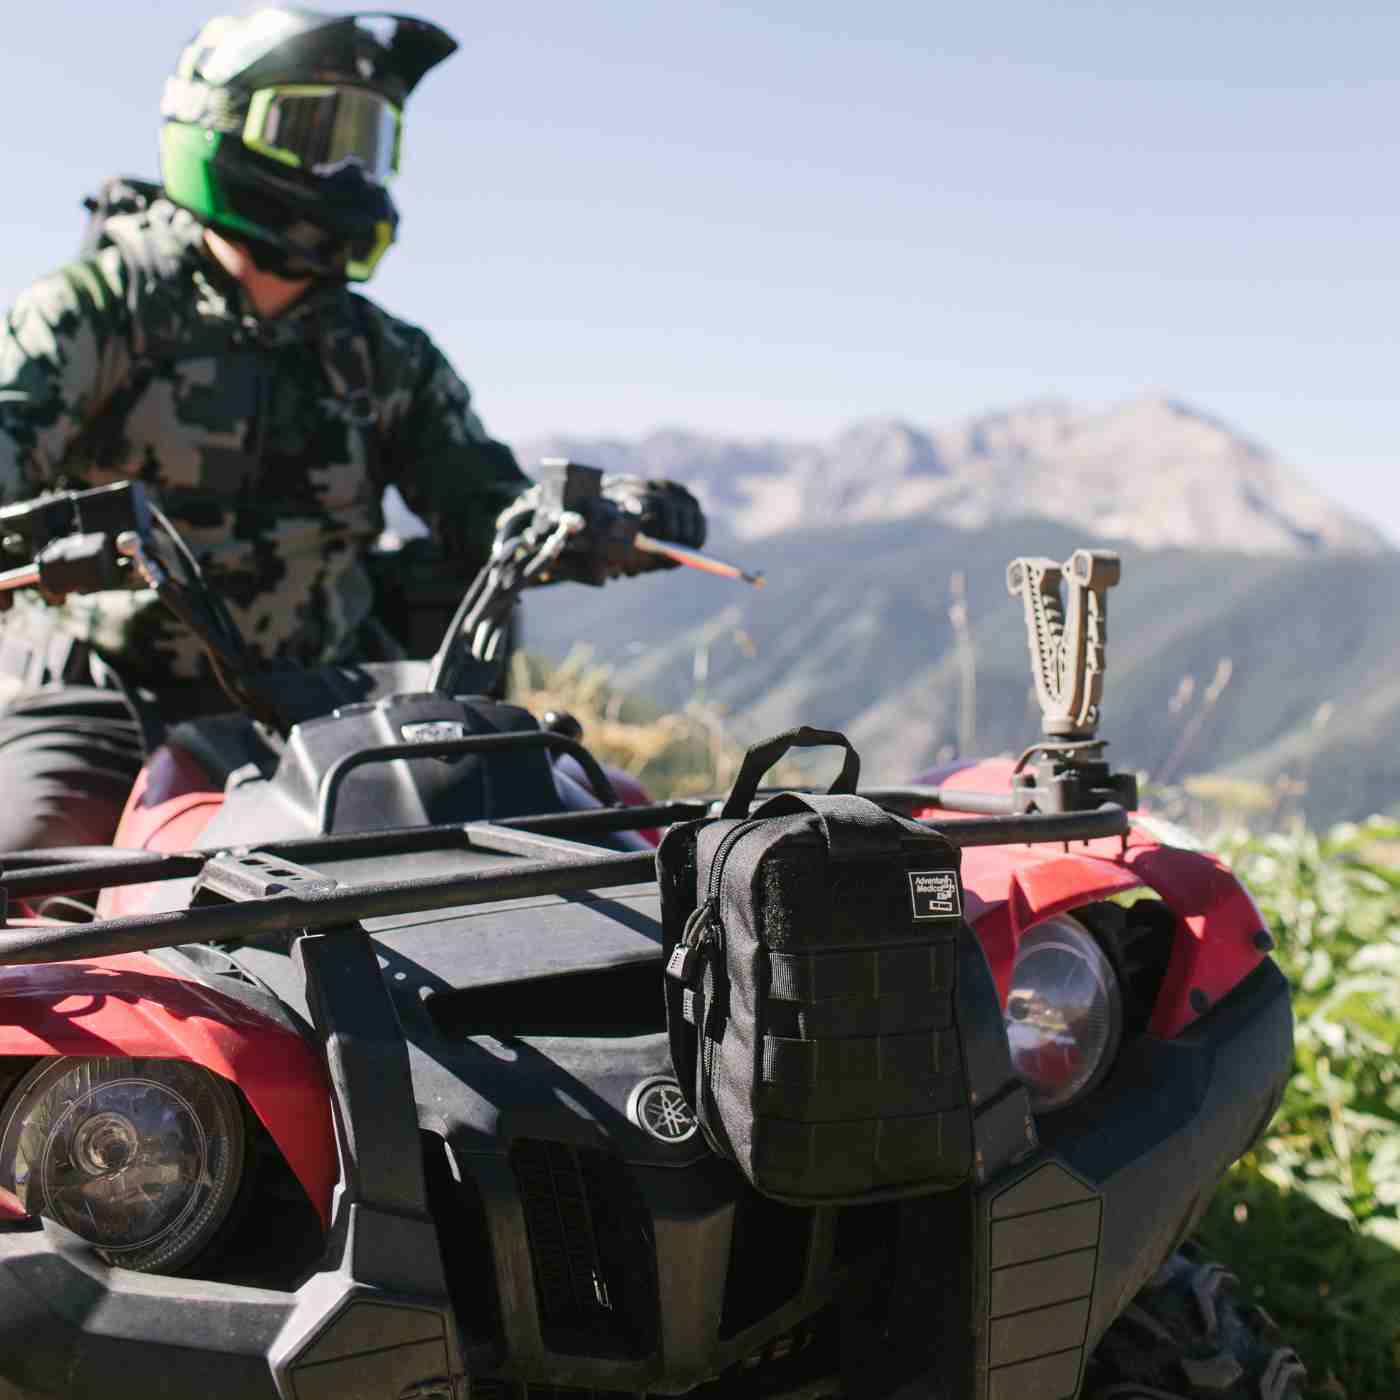 MOLLE Bag Trauma Kit 2.0 - Black kit on front of ATV with person in helmet and camo riding it